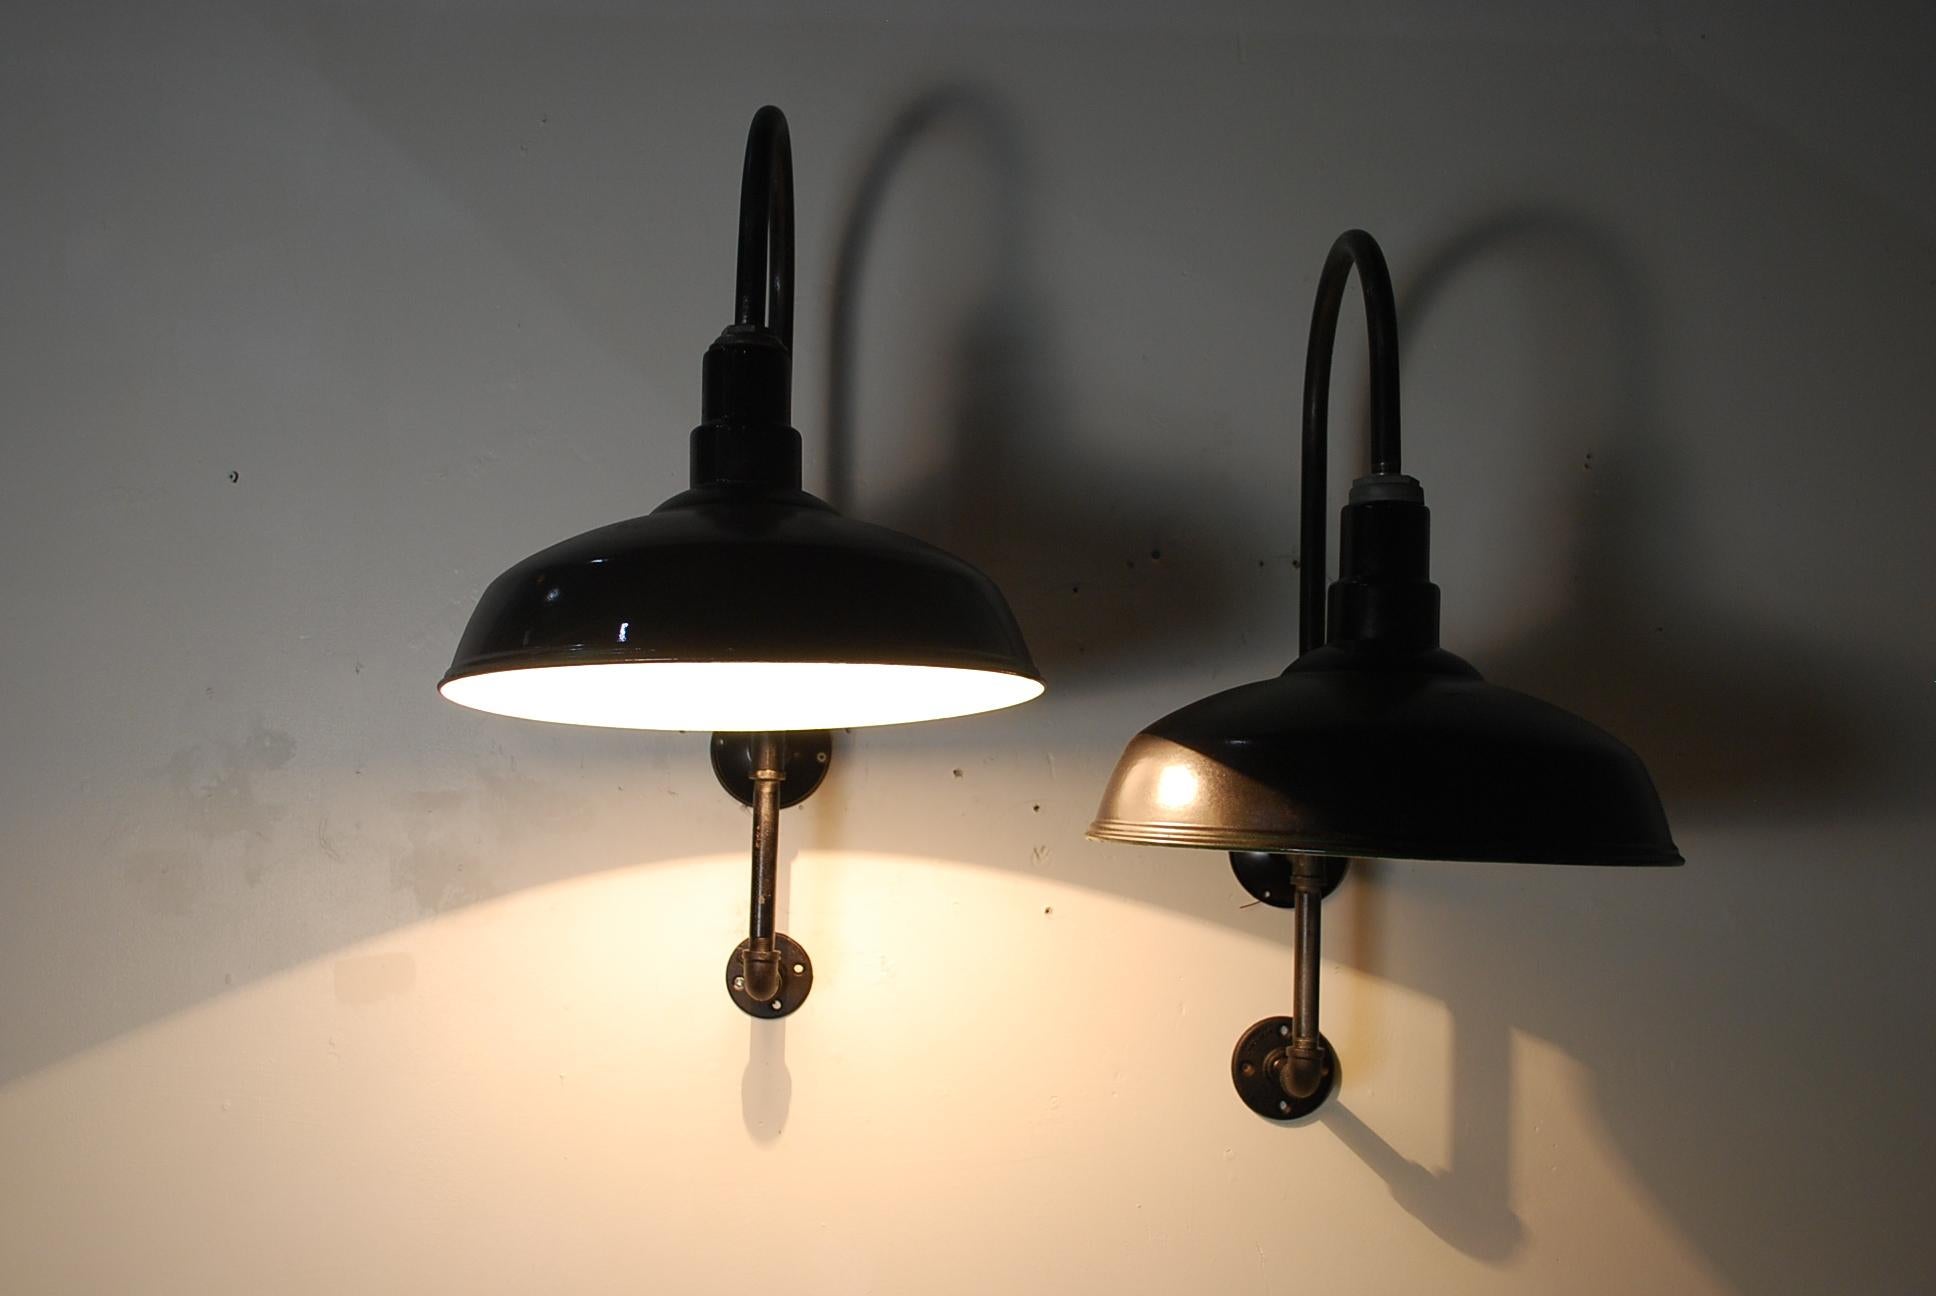 Rewired and compliant pair of industrial sconces connected to bespoke pipe configuration for easy set up.
The enamel shades are in a black finish ..with white underneath.
Regular bulb all ready to install.